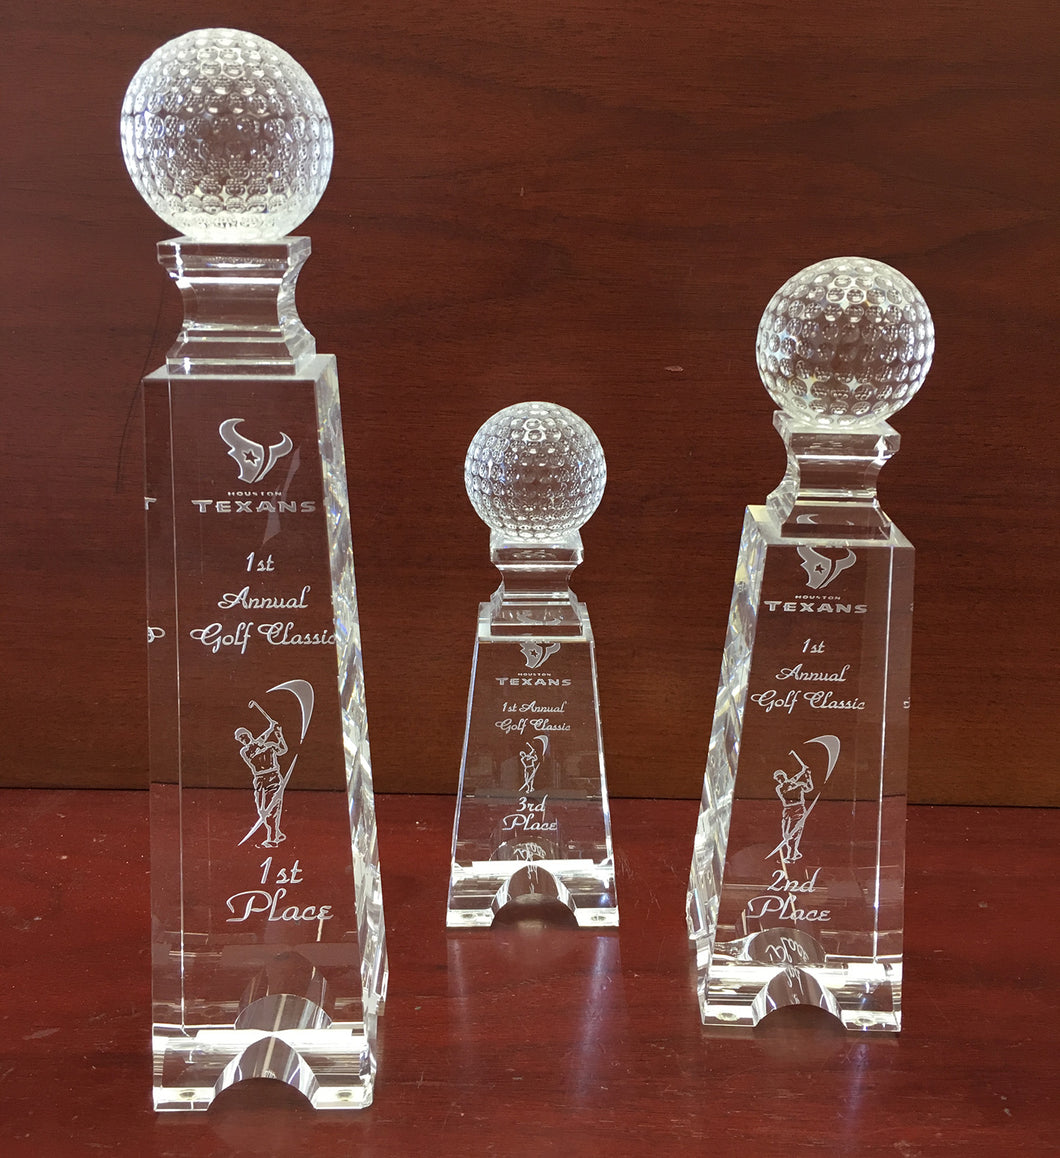 Optic Crystal Golf Ball Towers with Beveled Cut Edge